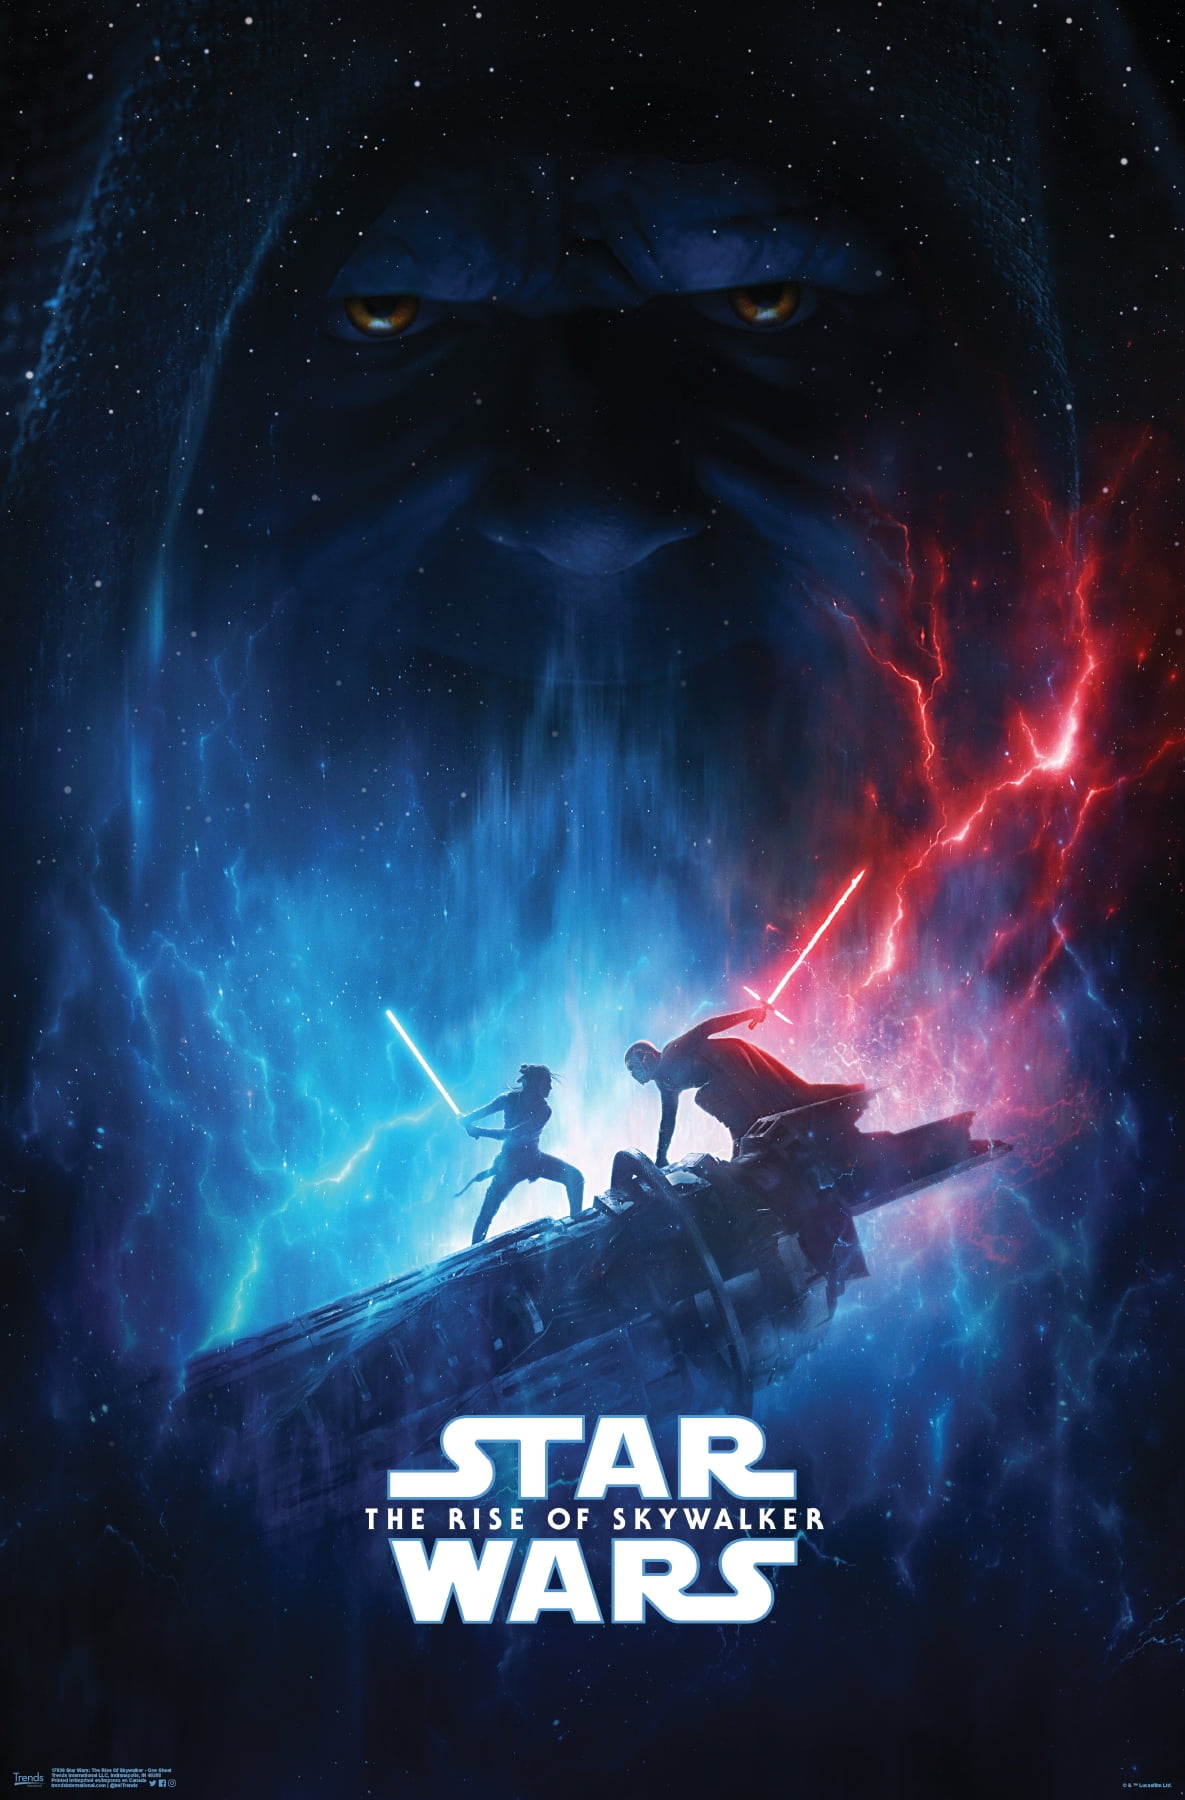 STAR WARS THE FORCE AWAKENS One-Sheet 24x36 Retail Edition MOVIE POSTER 